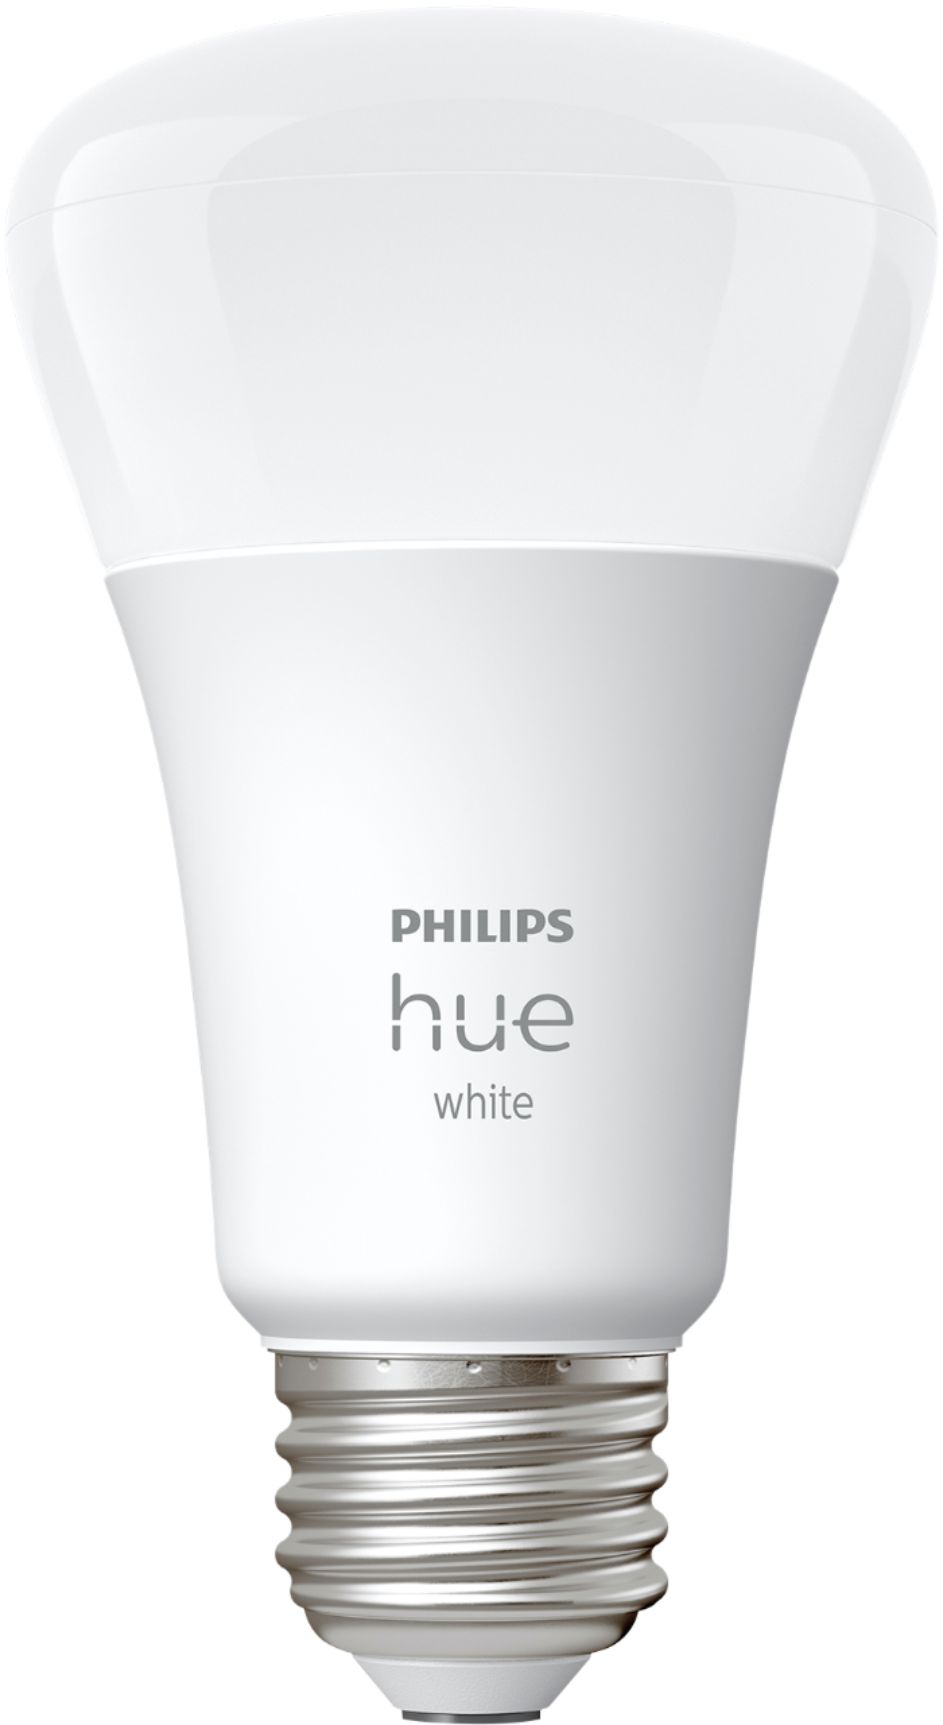 Philips Hue White & Colour Ambiance 9.5W Equivalent 60W A19 E26 LED Smart Bulb Colour Changing Starter Kit Bluetooth & Zigbee Compatible Voice Activated with Alexa 3-Set & Smart Button 